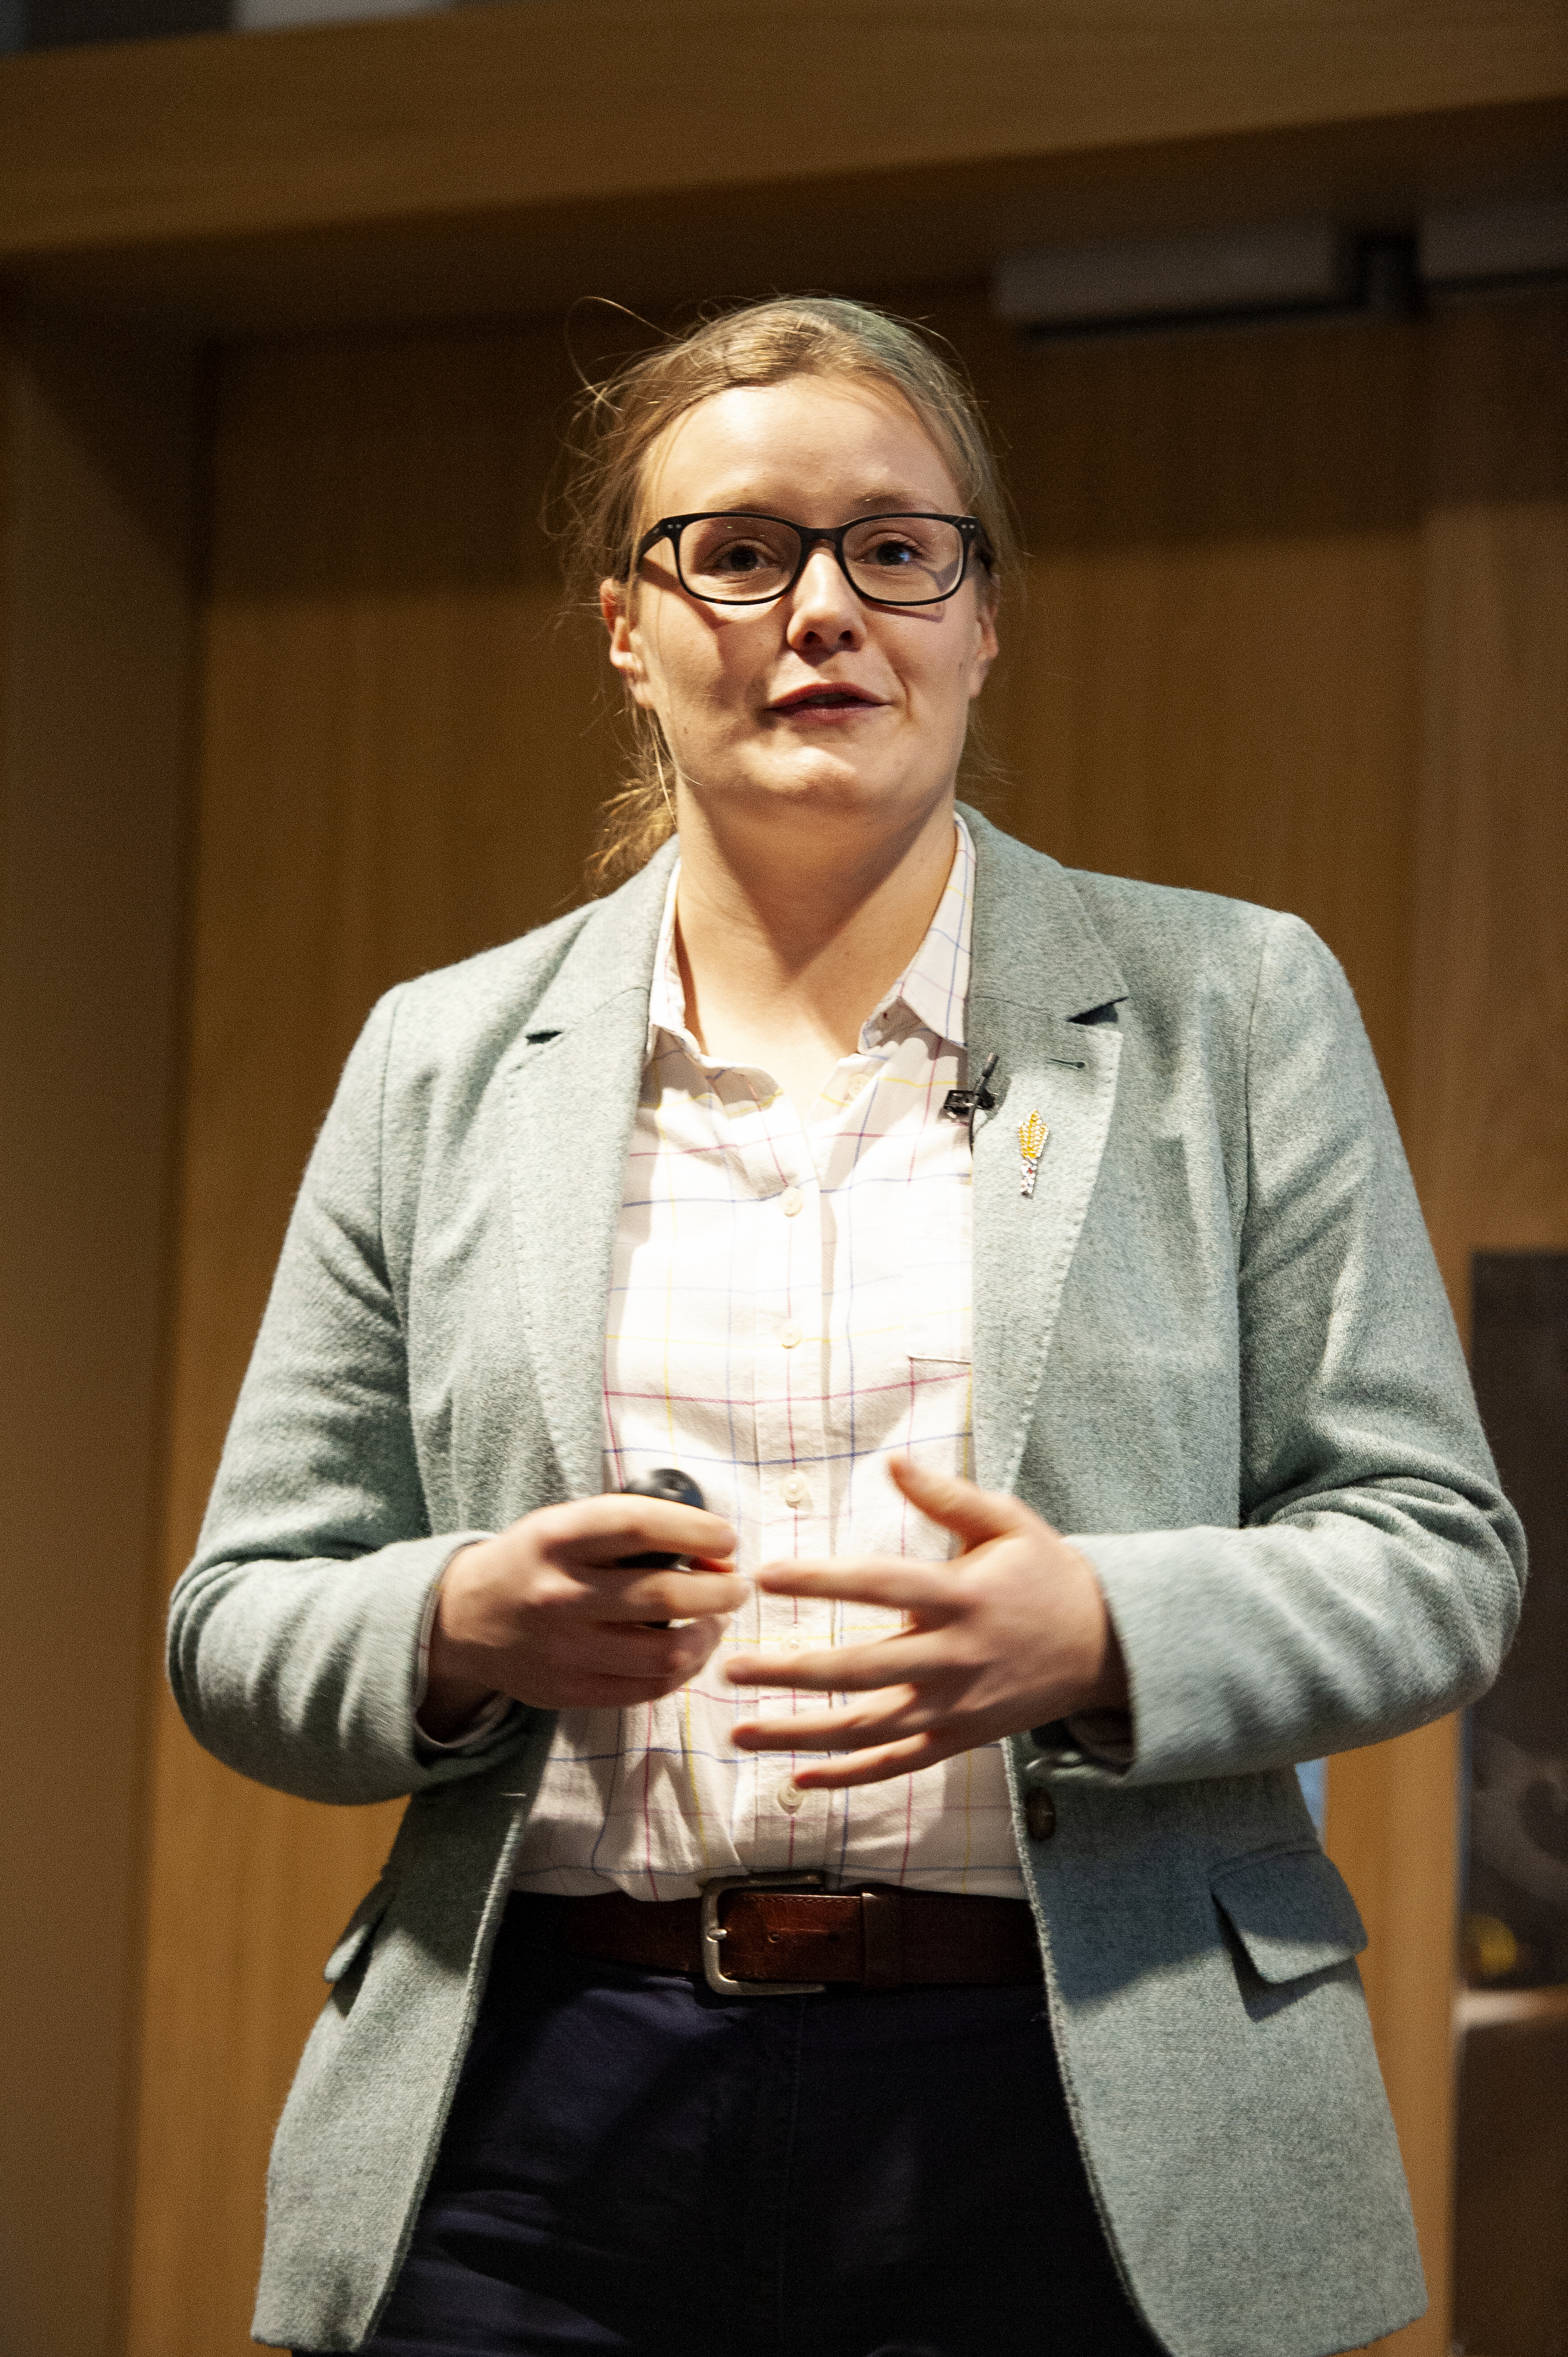 Georgina Barratt, Applied Crop Scientist, BBRO, speaking during the sugar breakout session at NFU conference 2022